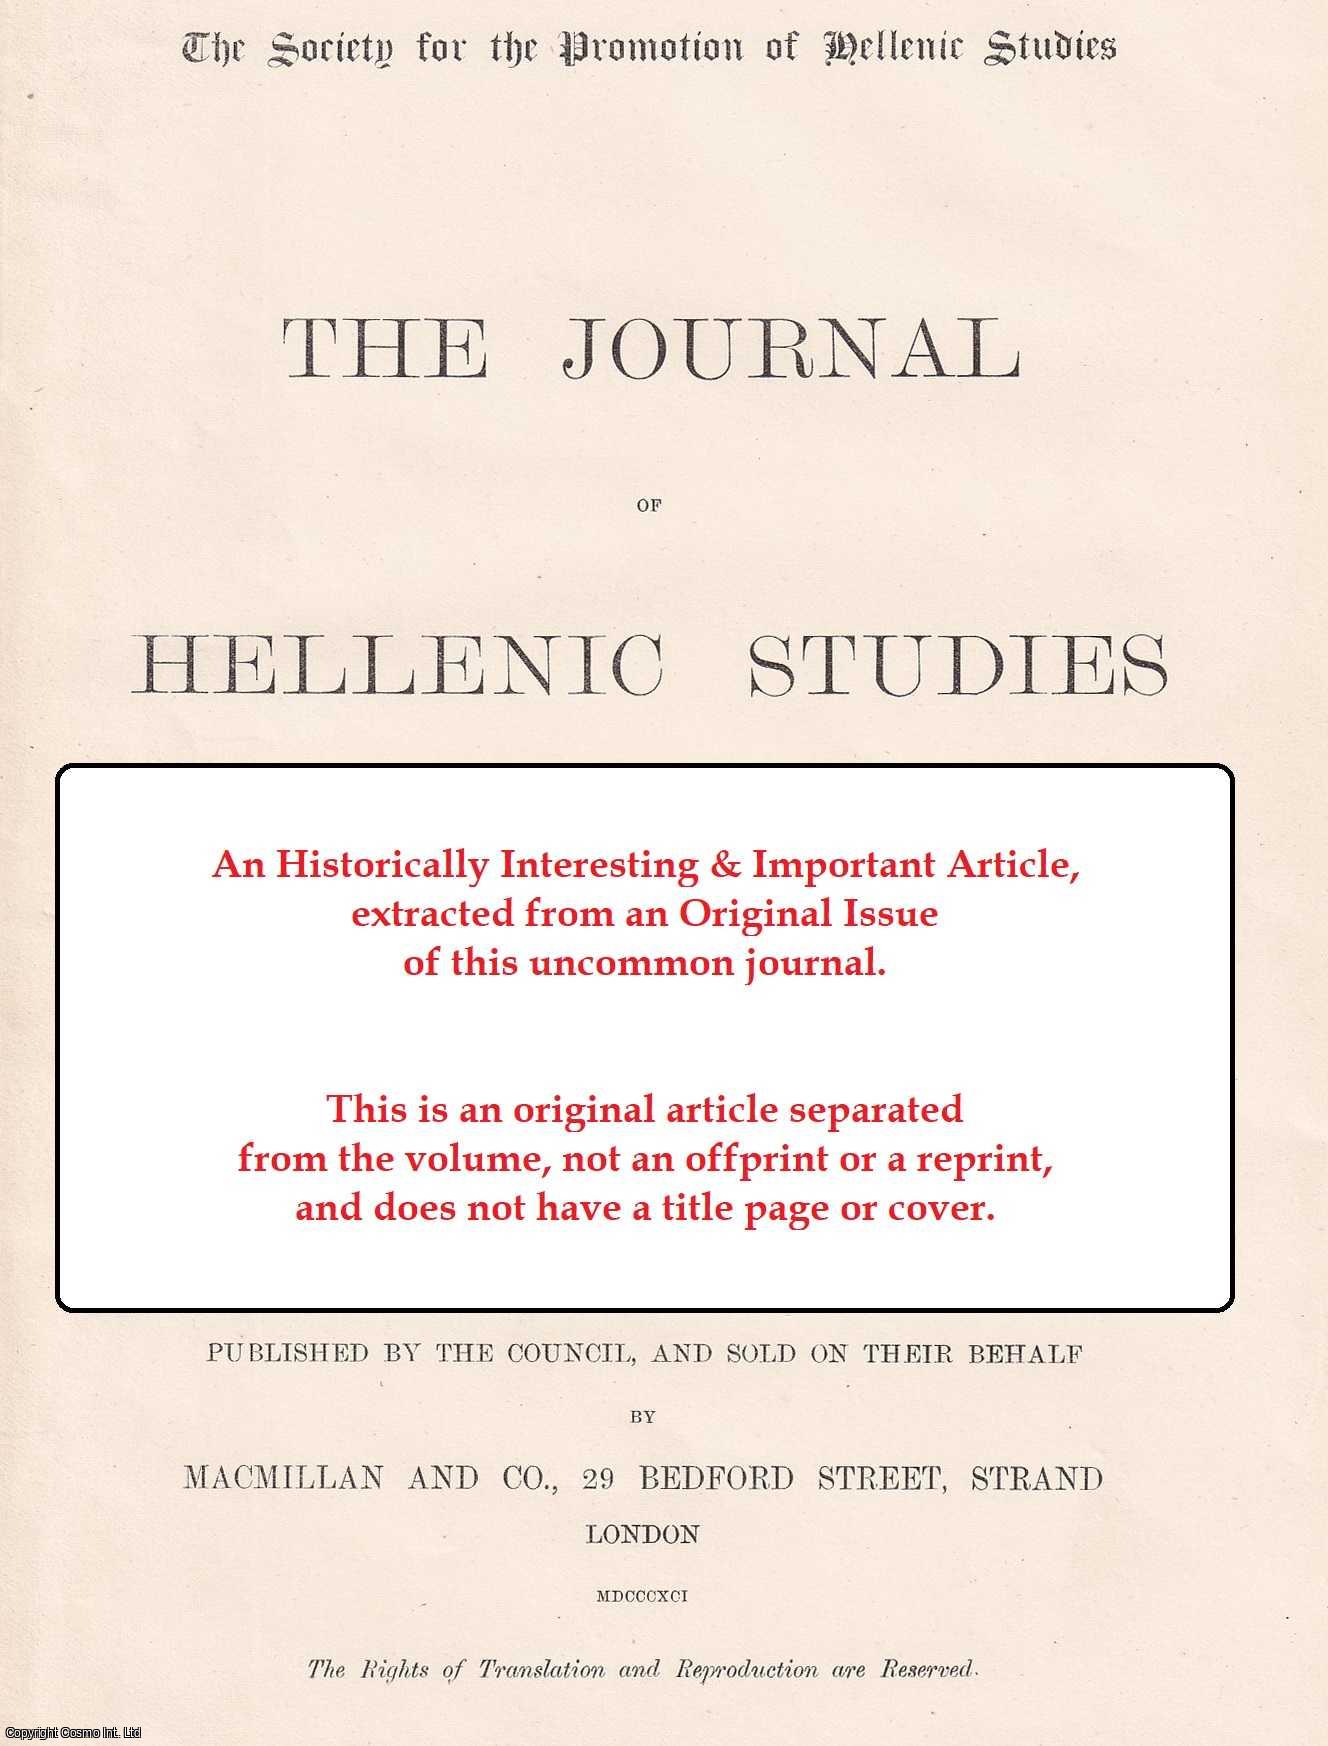 Ronald M. Burrows - Pylos and Sphacteria. An uncommon original article from the journal of Hellenic studies, 1896.